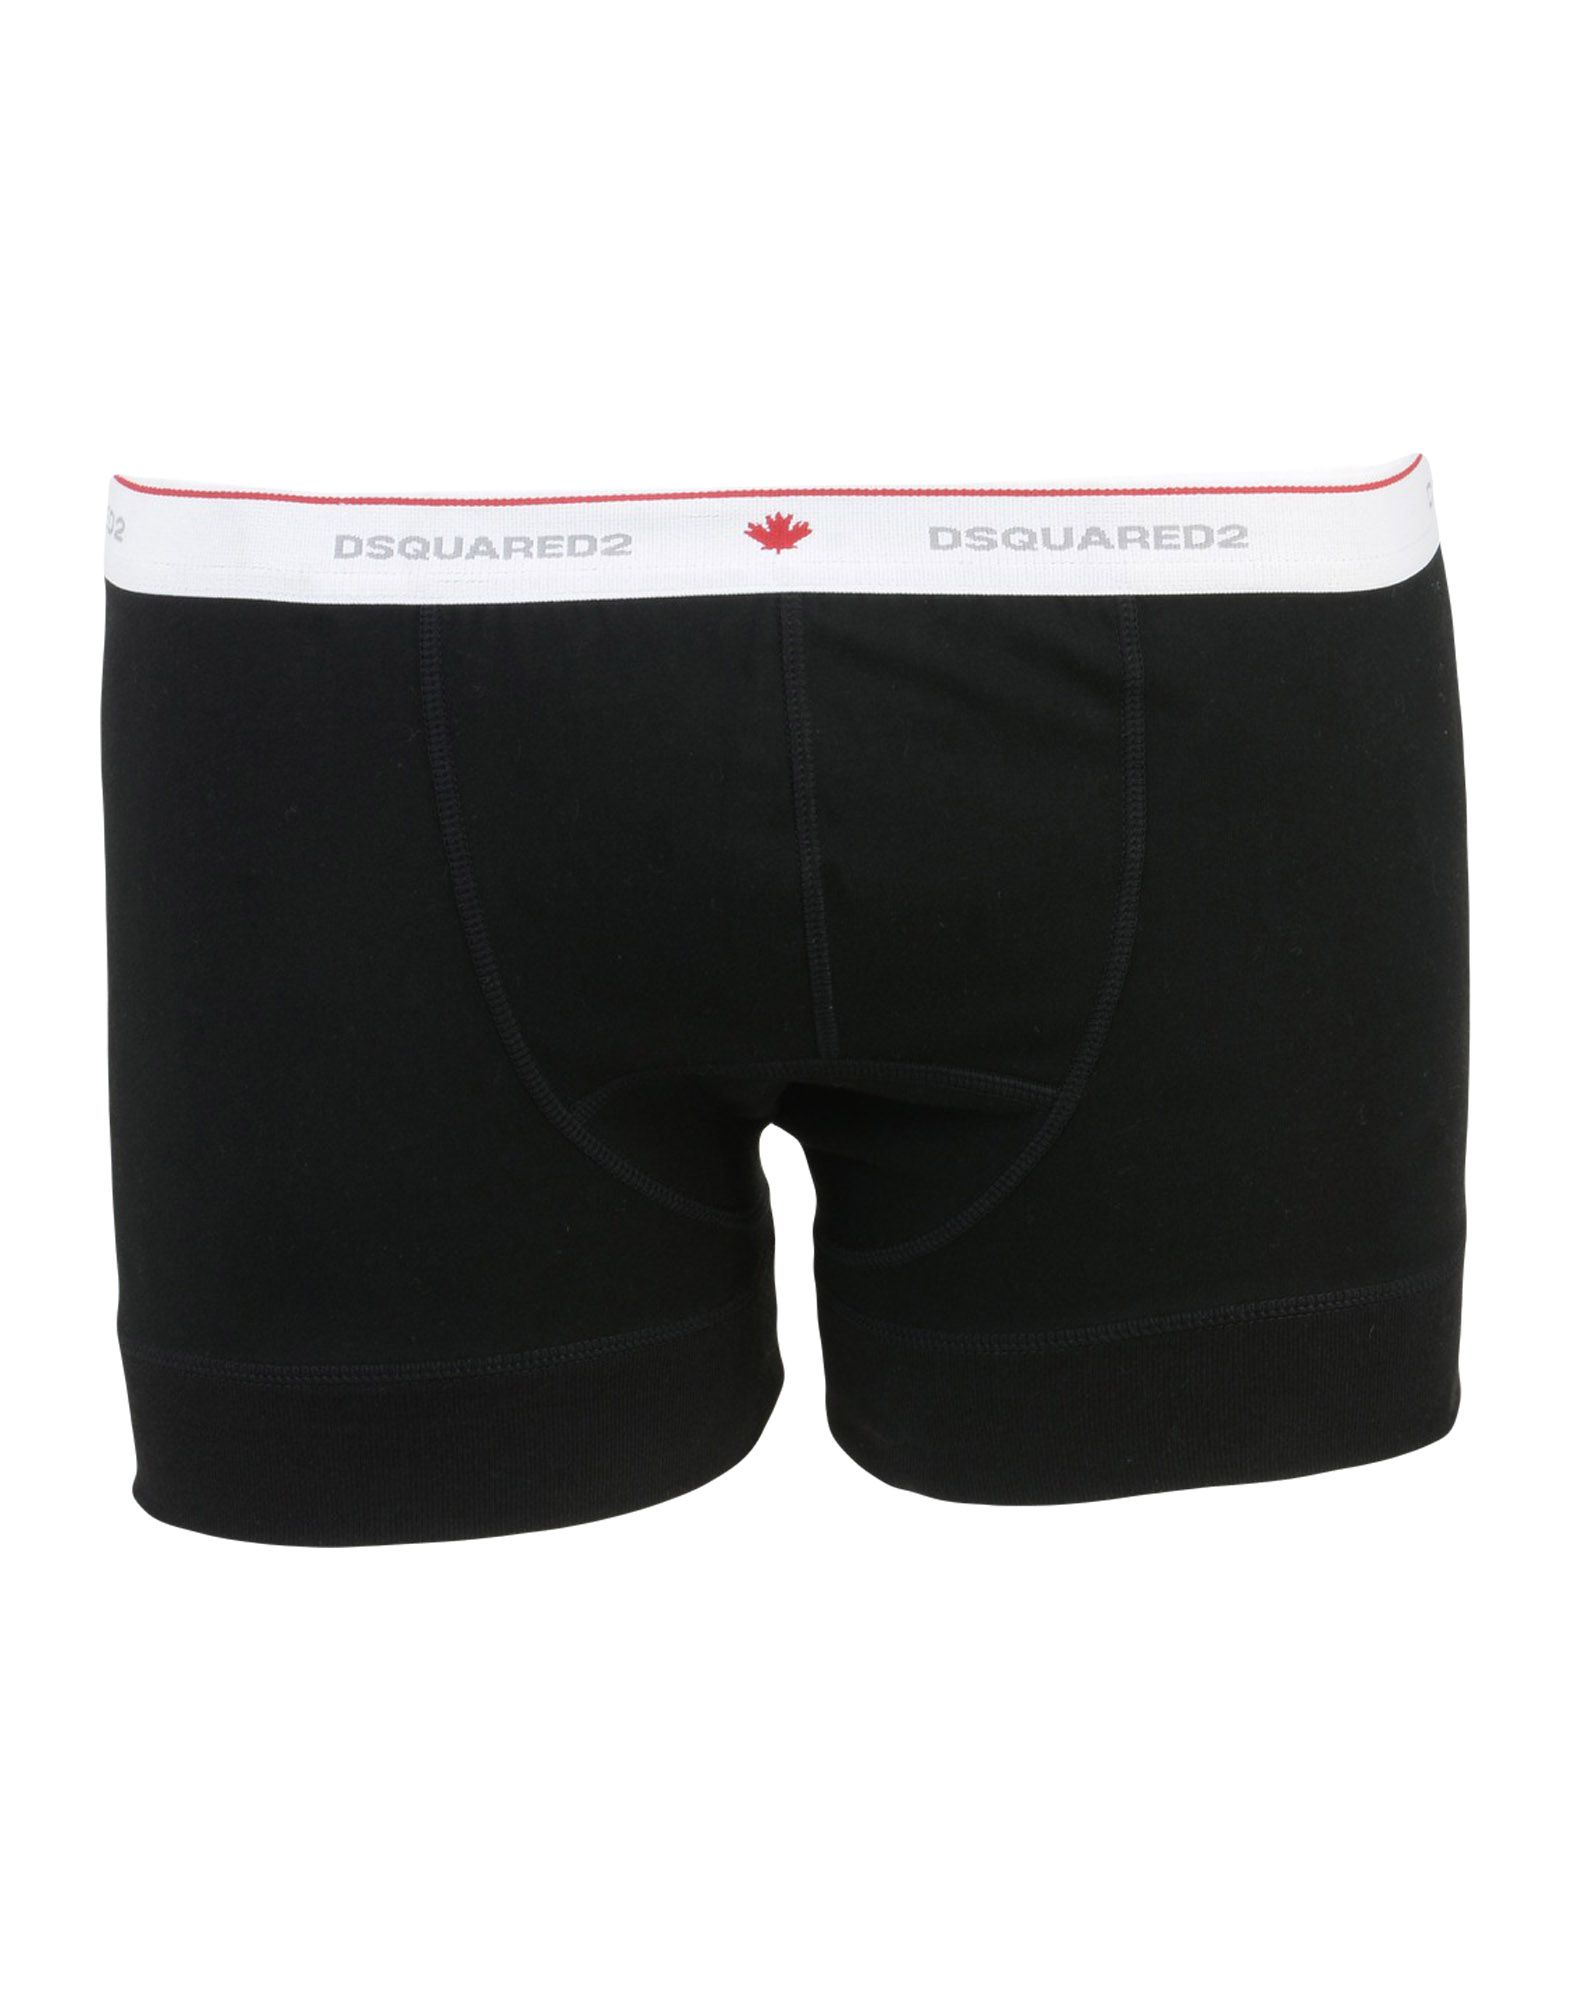 DSQUARED2 BOXERS,48202324WI 5